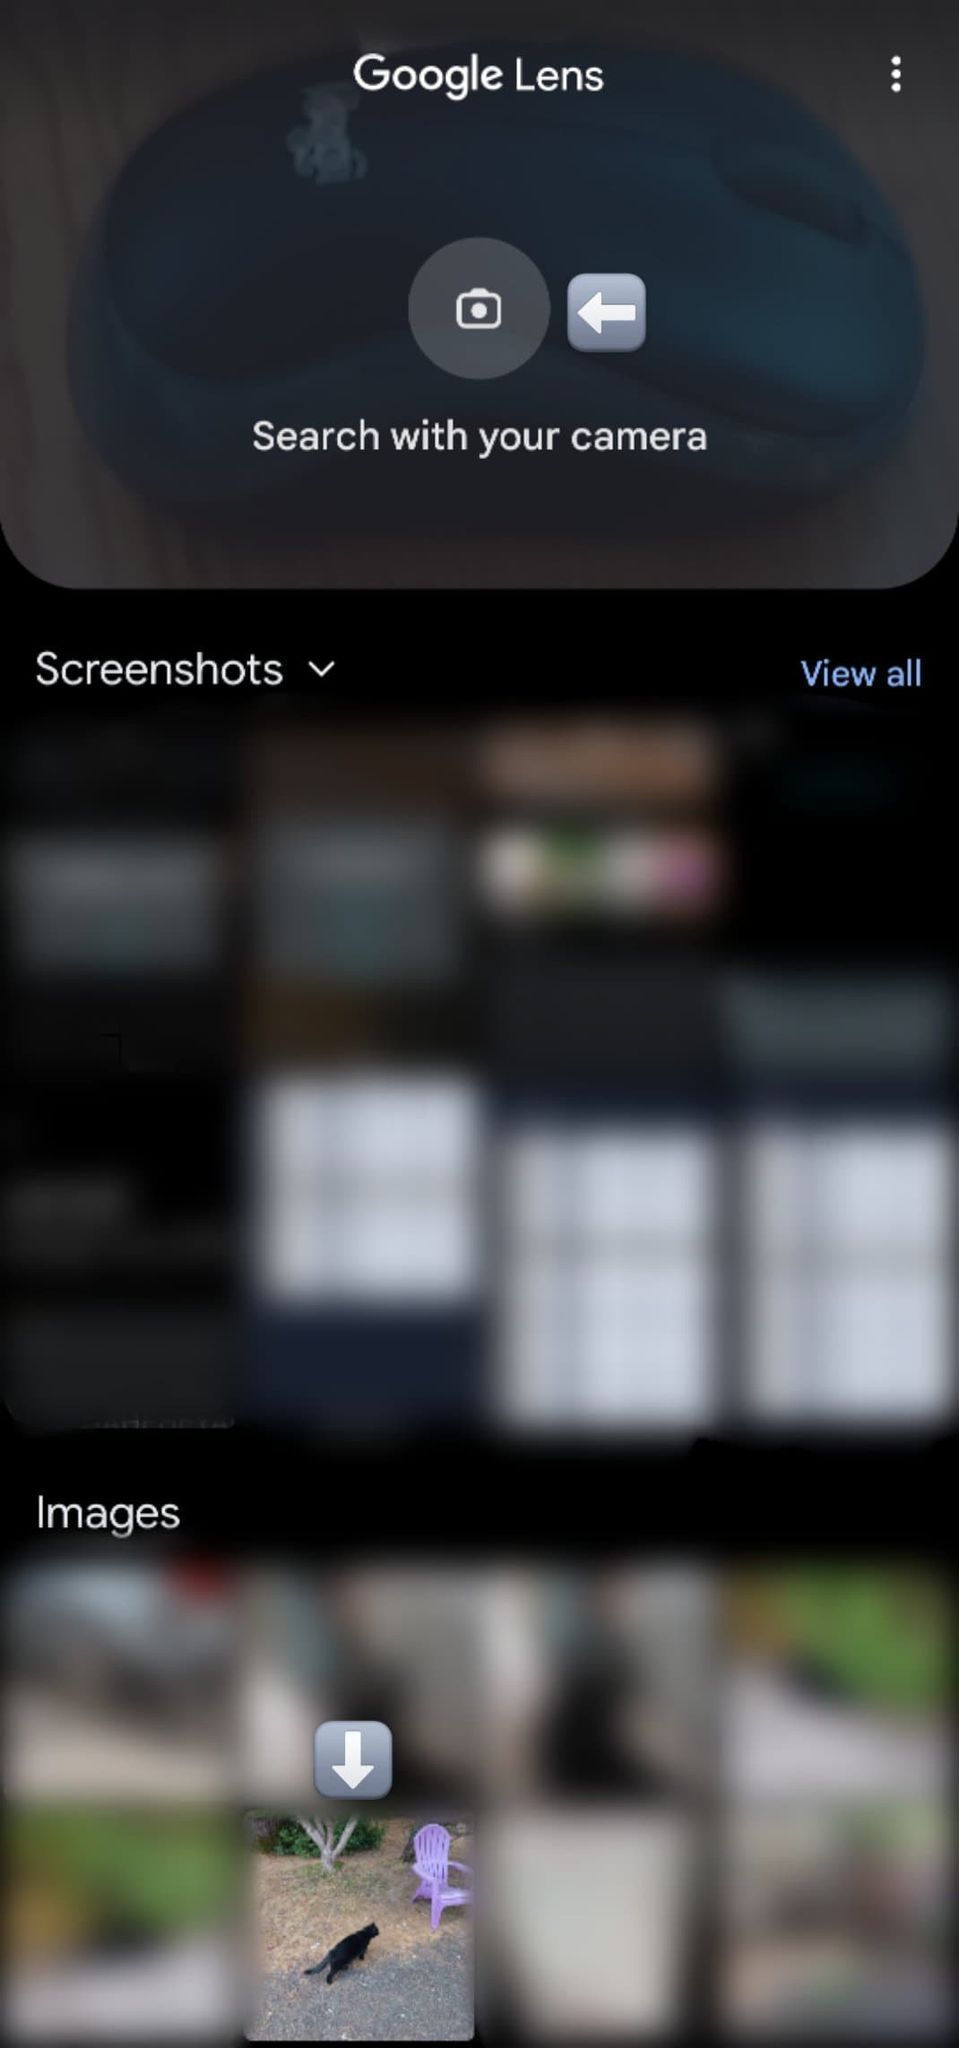 Image shows Google Lens front page after permissions are granted with arrows pointing to the camera icon and a saved photo.